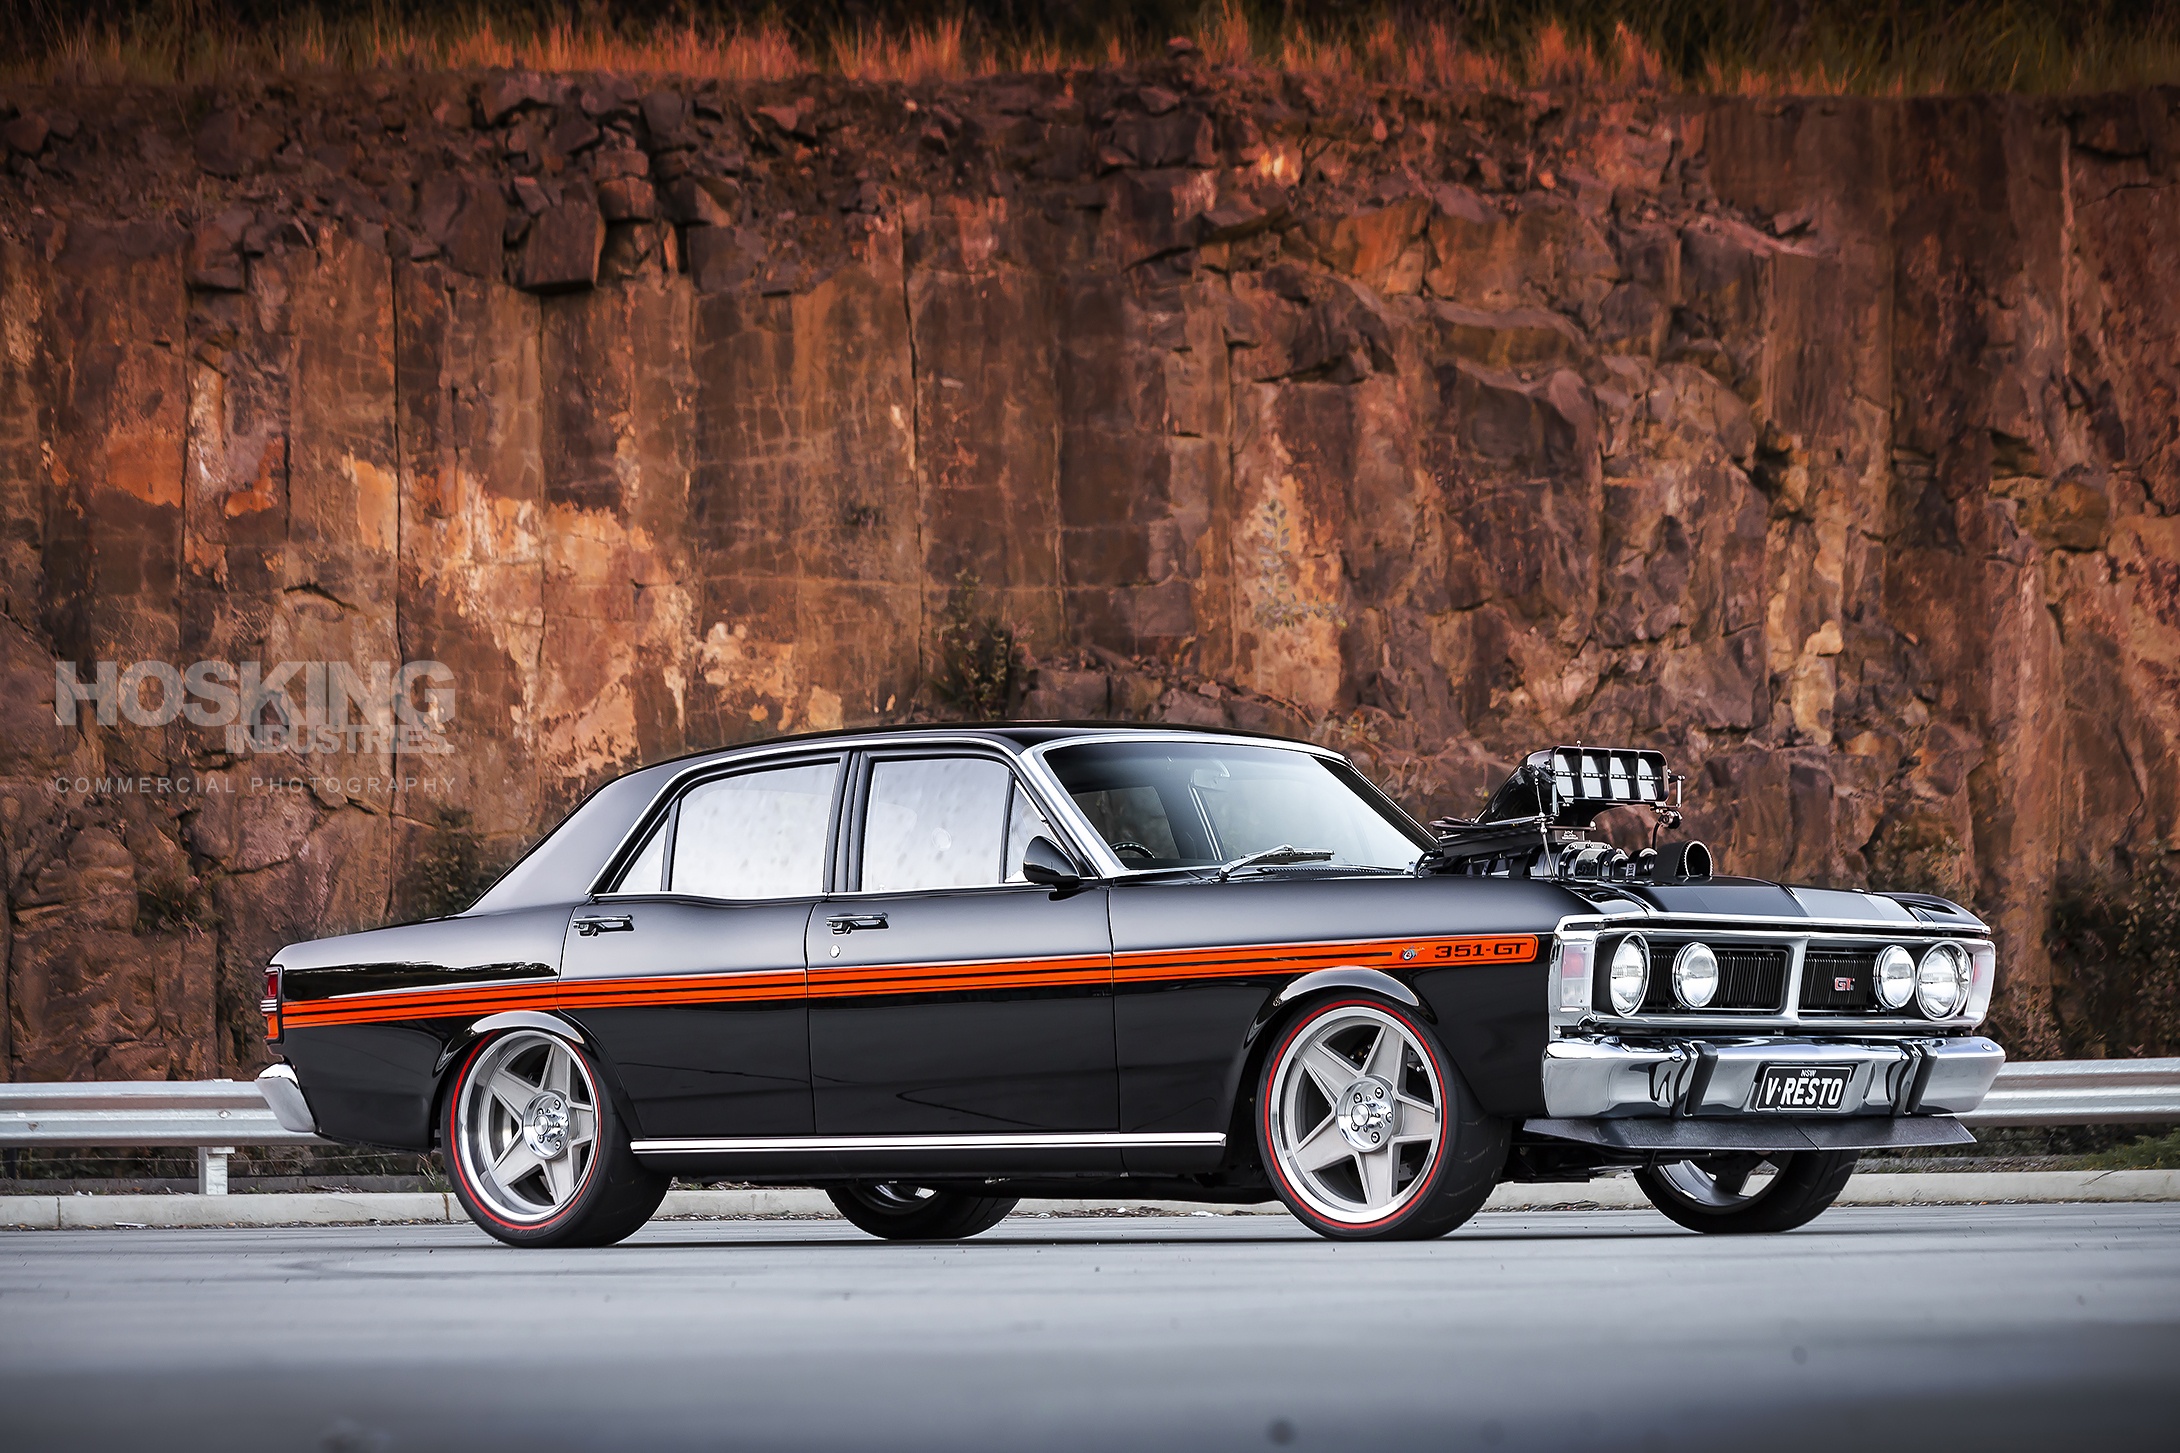 Ford Xy Falcon Gt Wallpapers